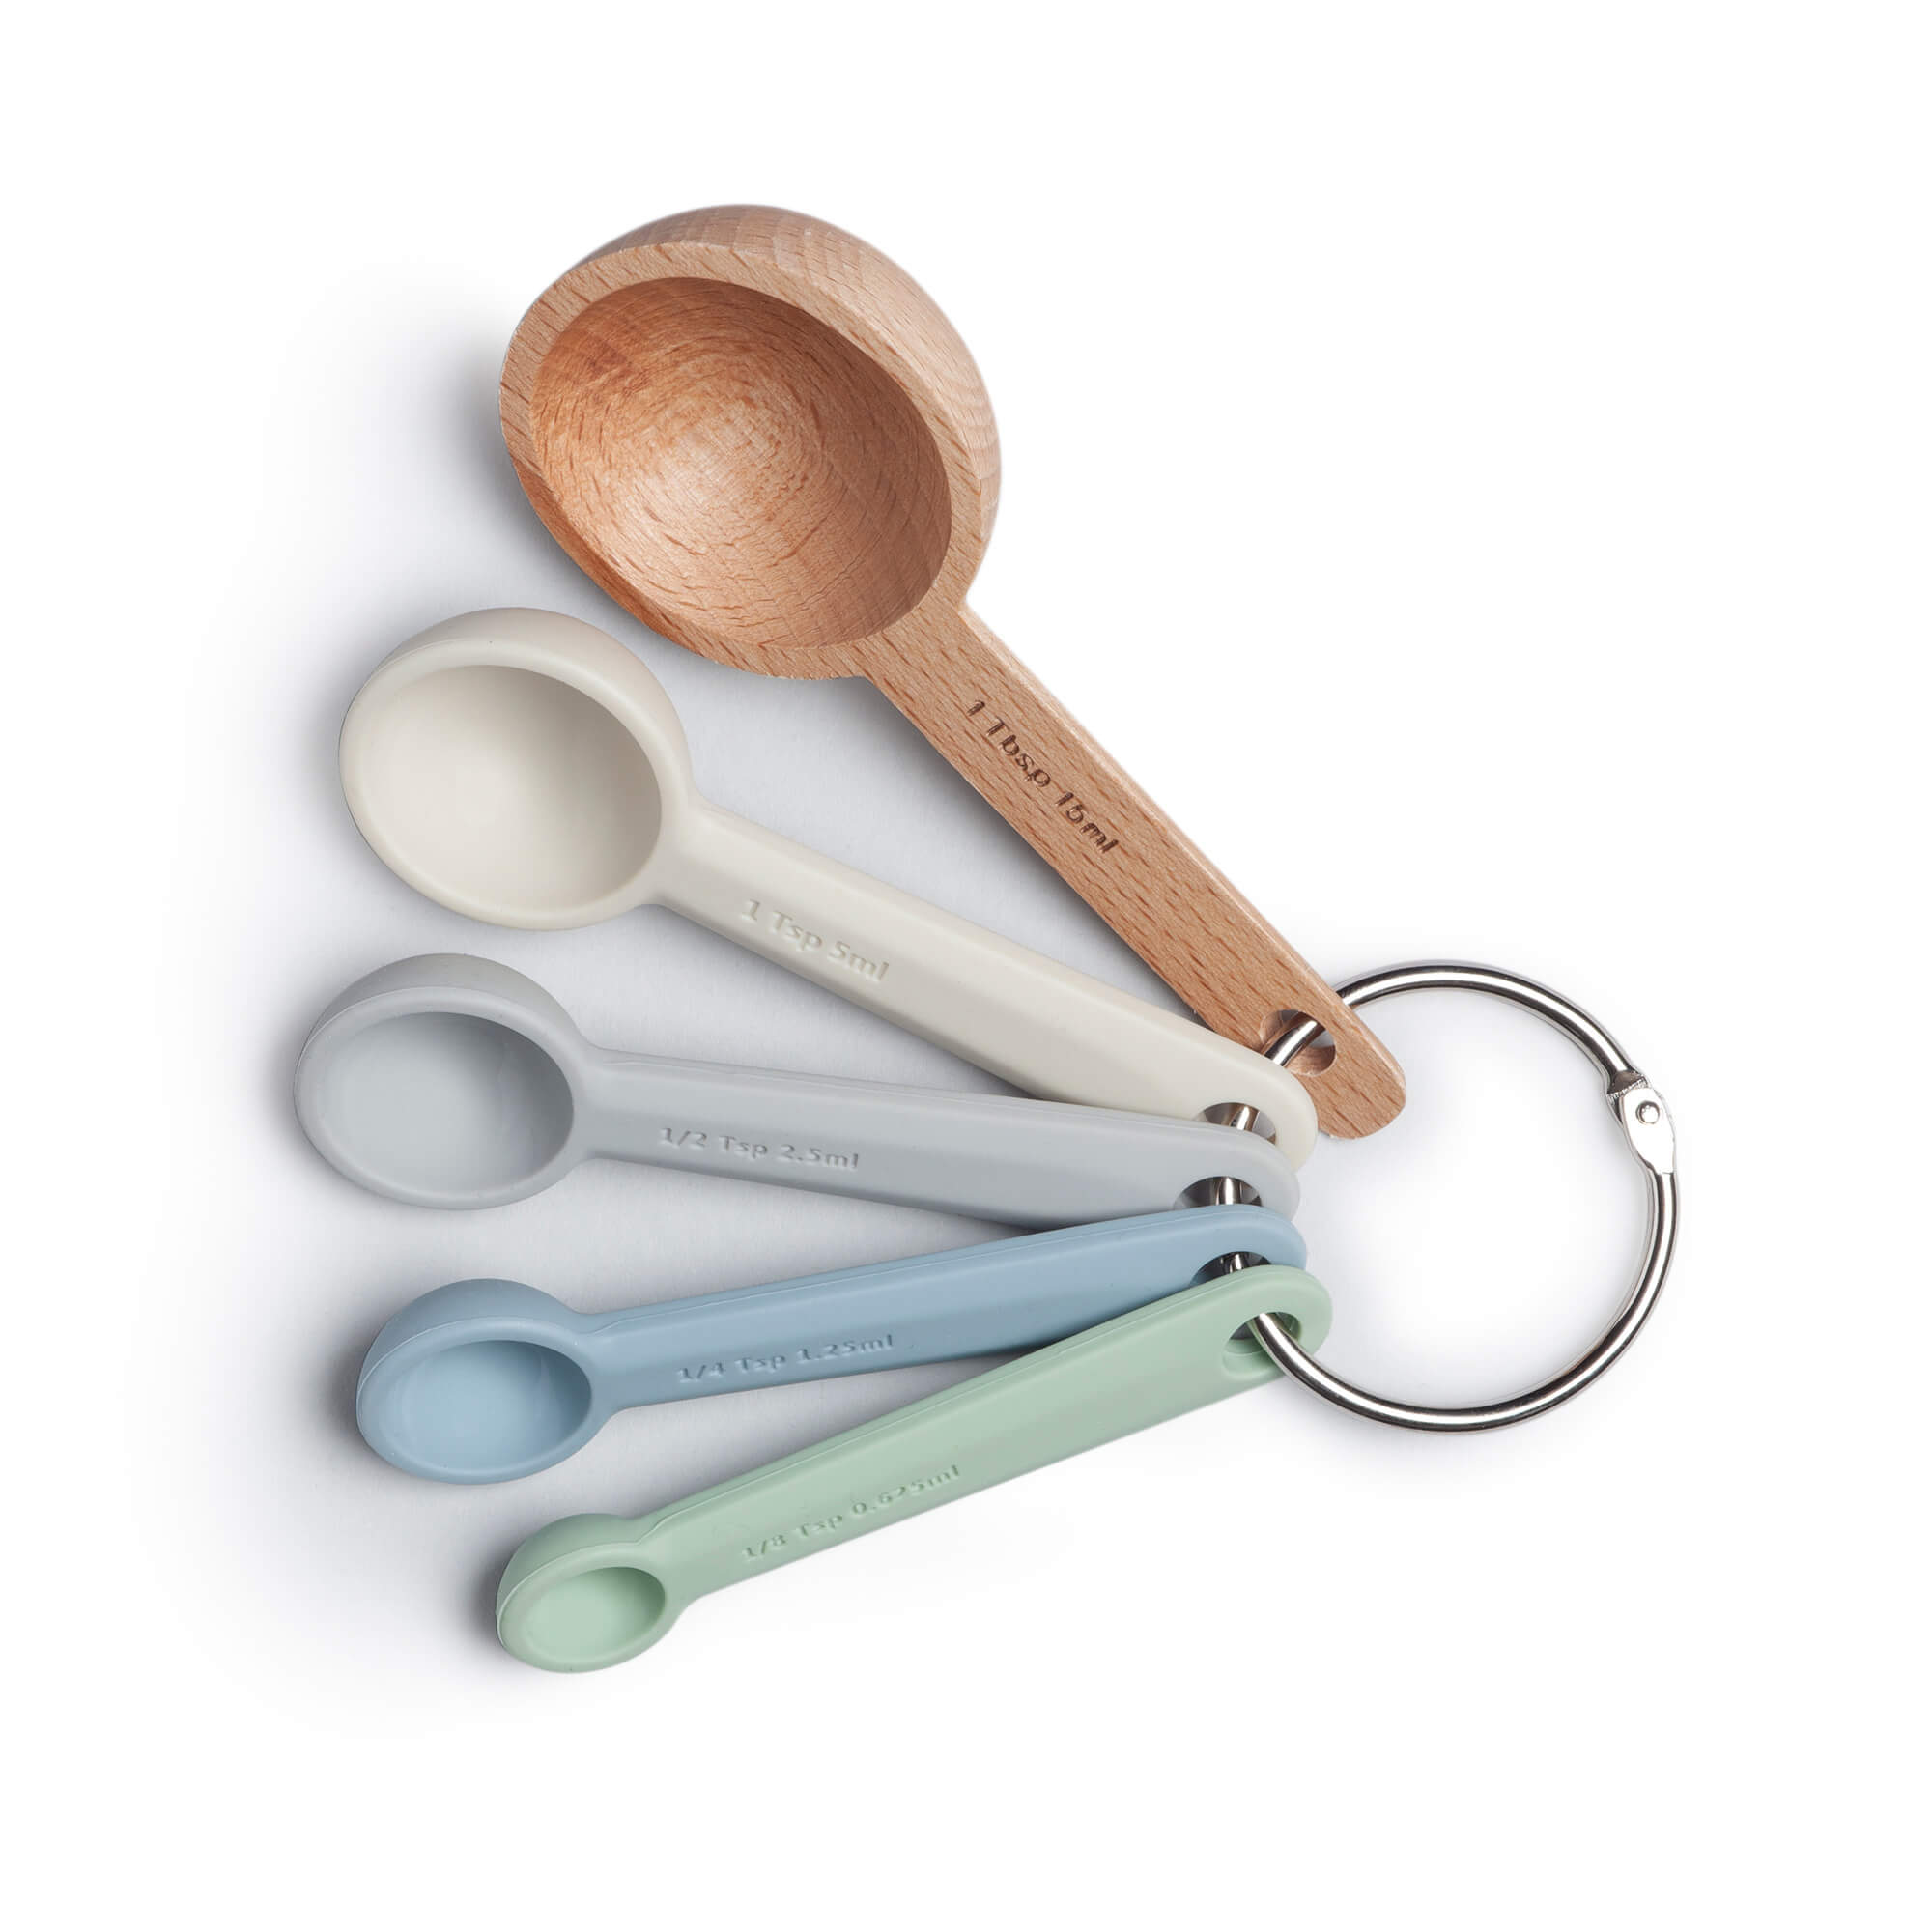 Measuring Spoon Set - Stainless Steel Measuring Spoons and Blue Plastic  Measuring Cups for Liquids and Solids